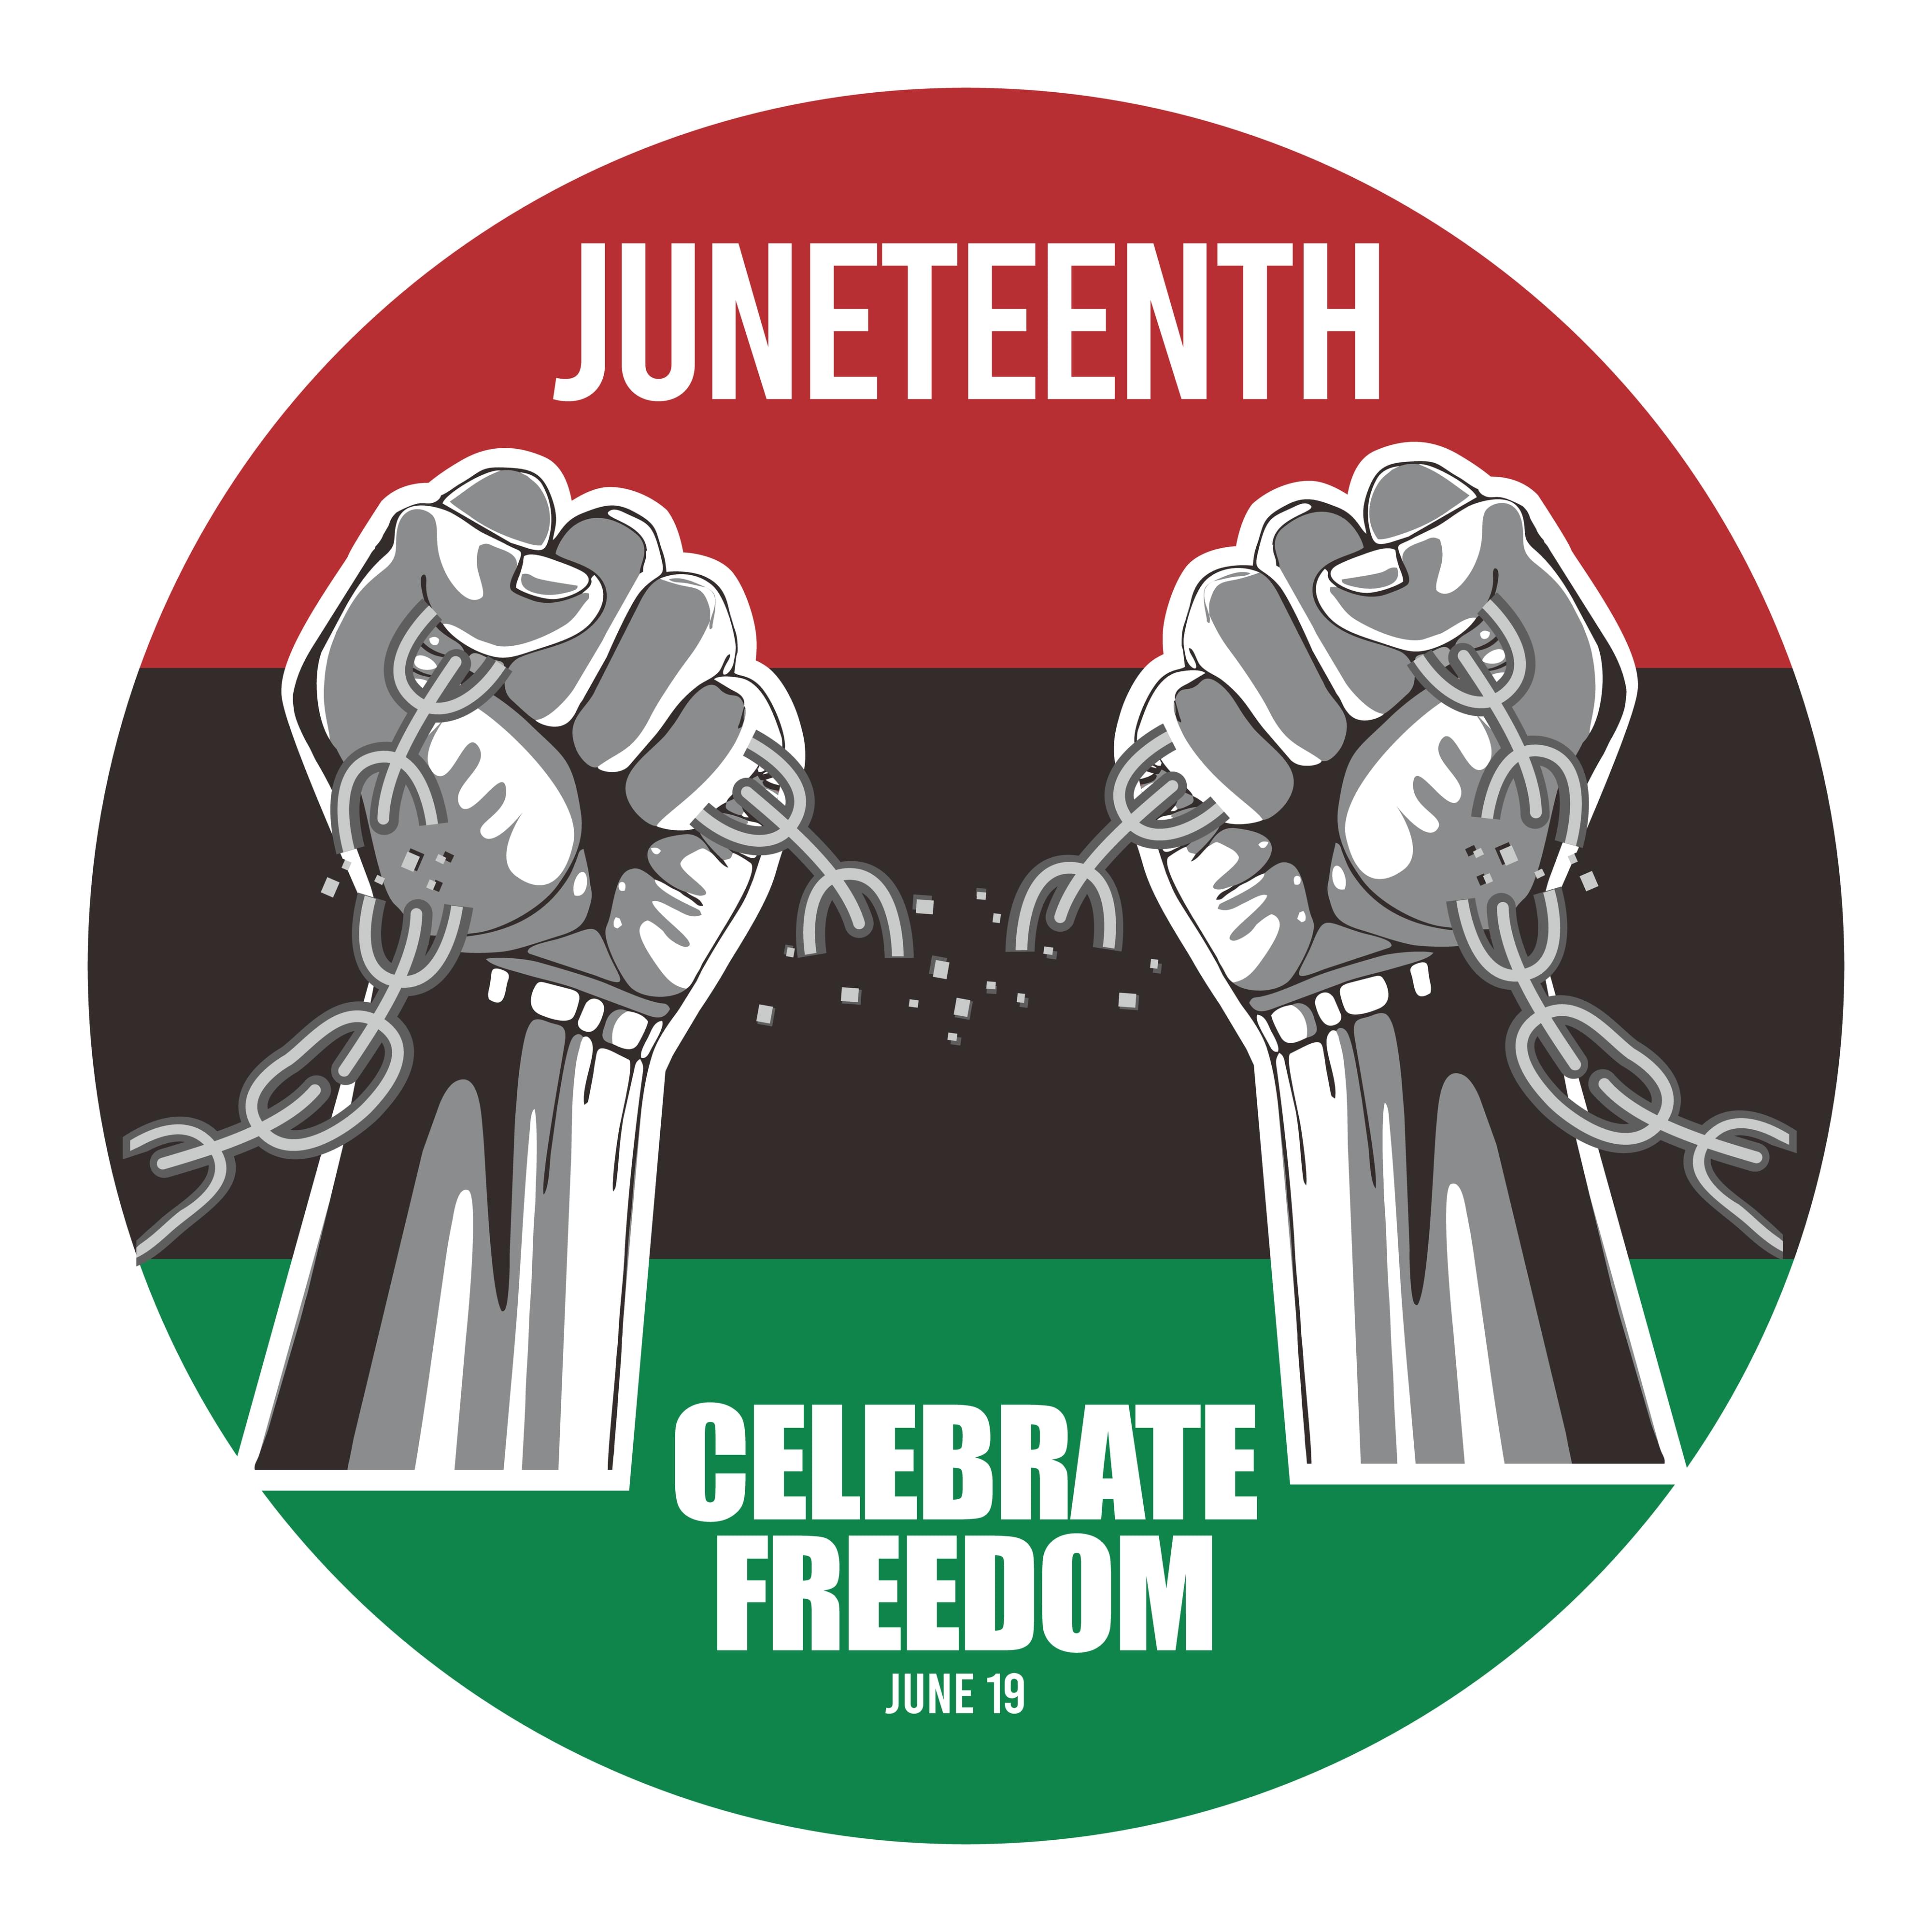 Bertie County To Make Juneteeth A Holiday in 2021